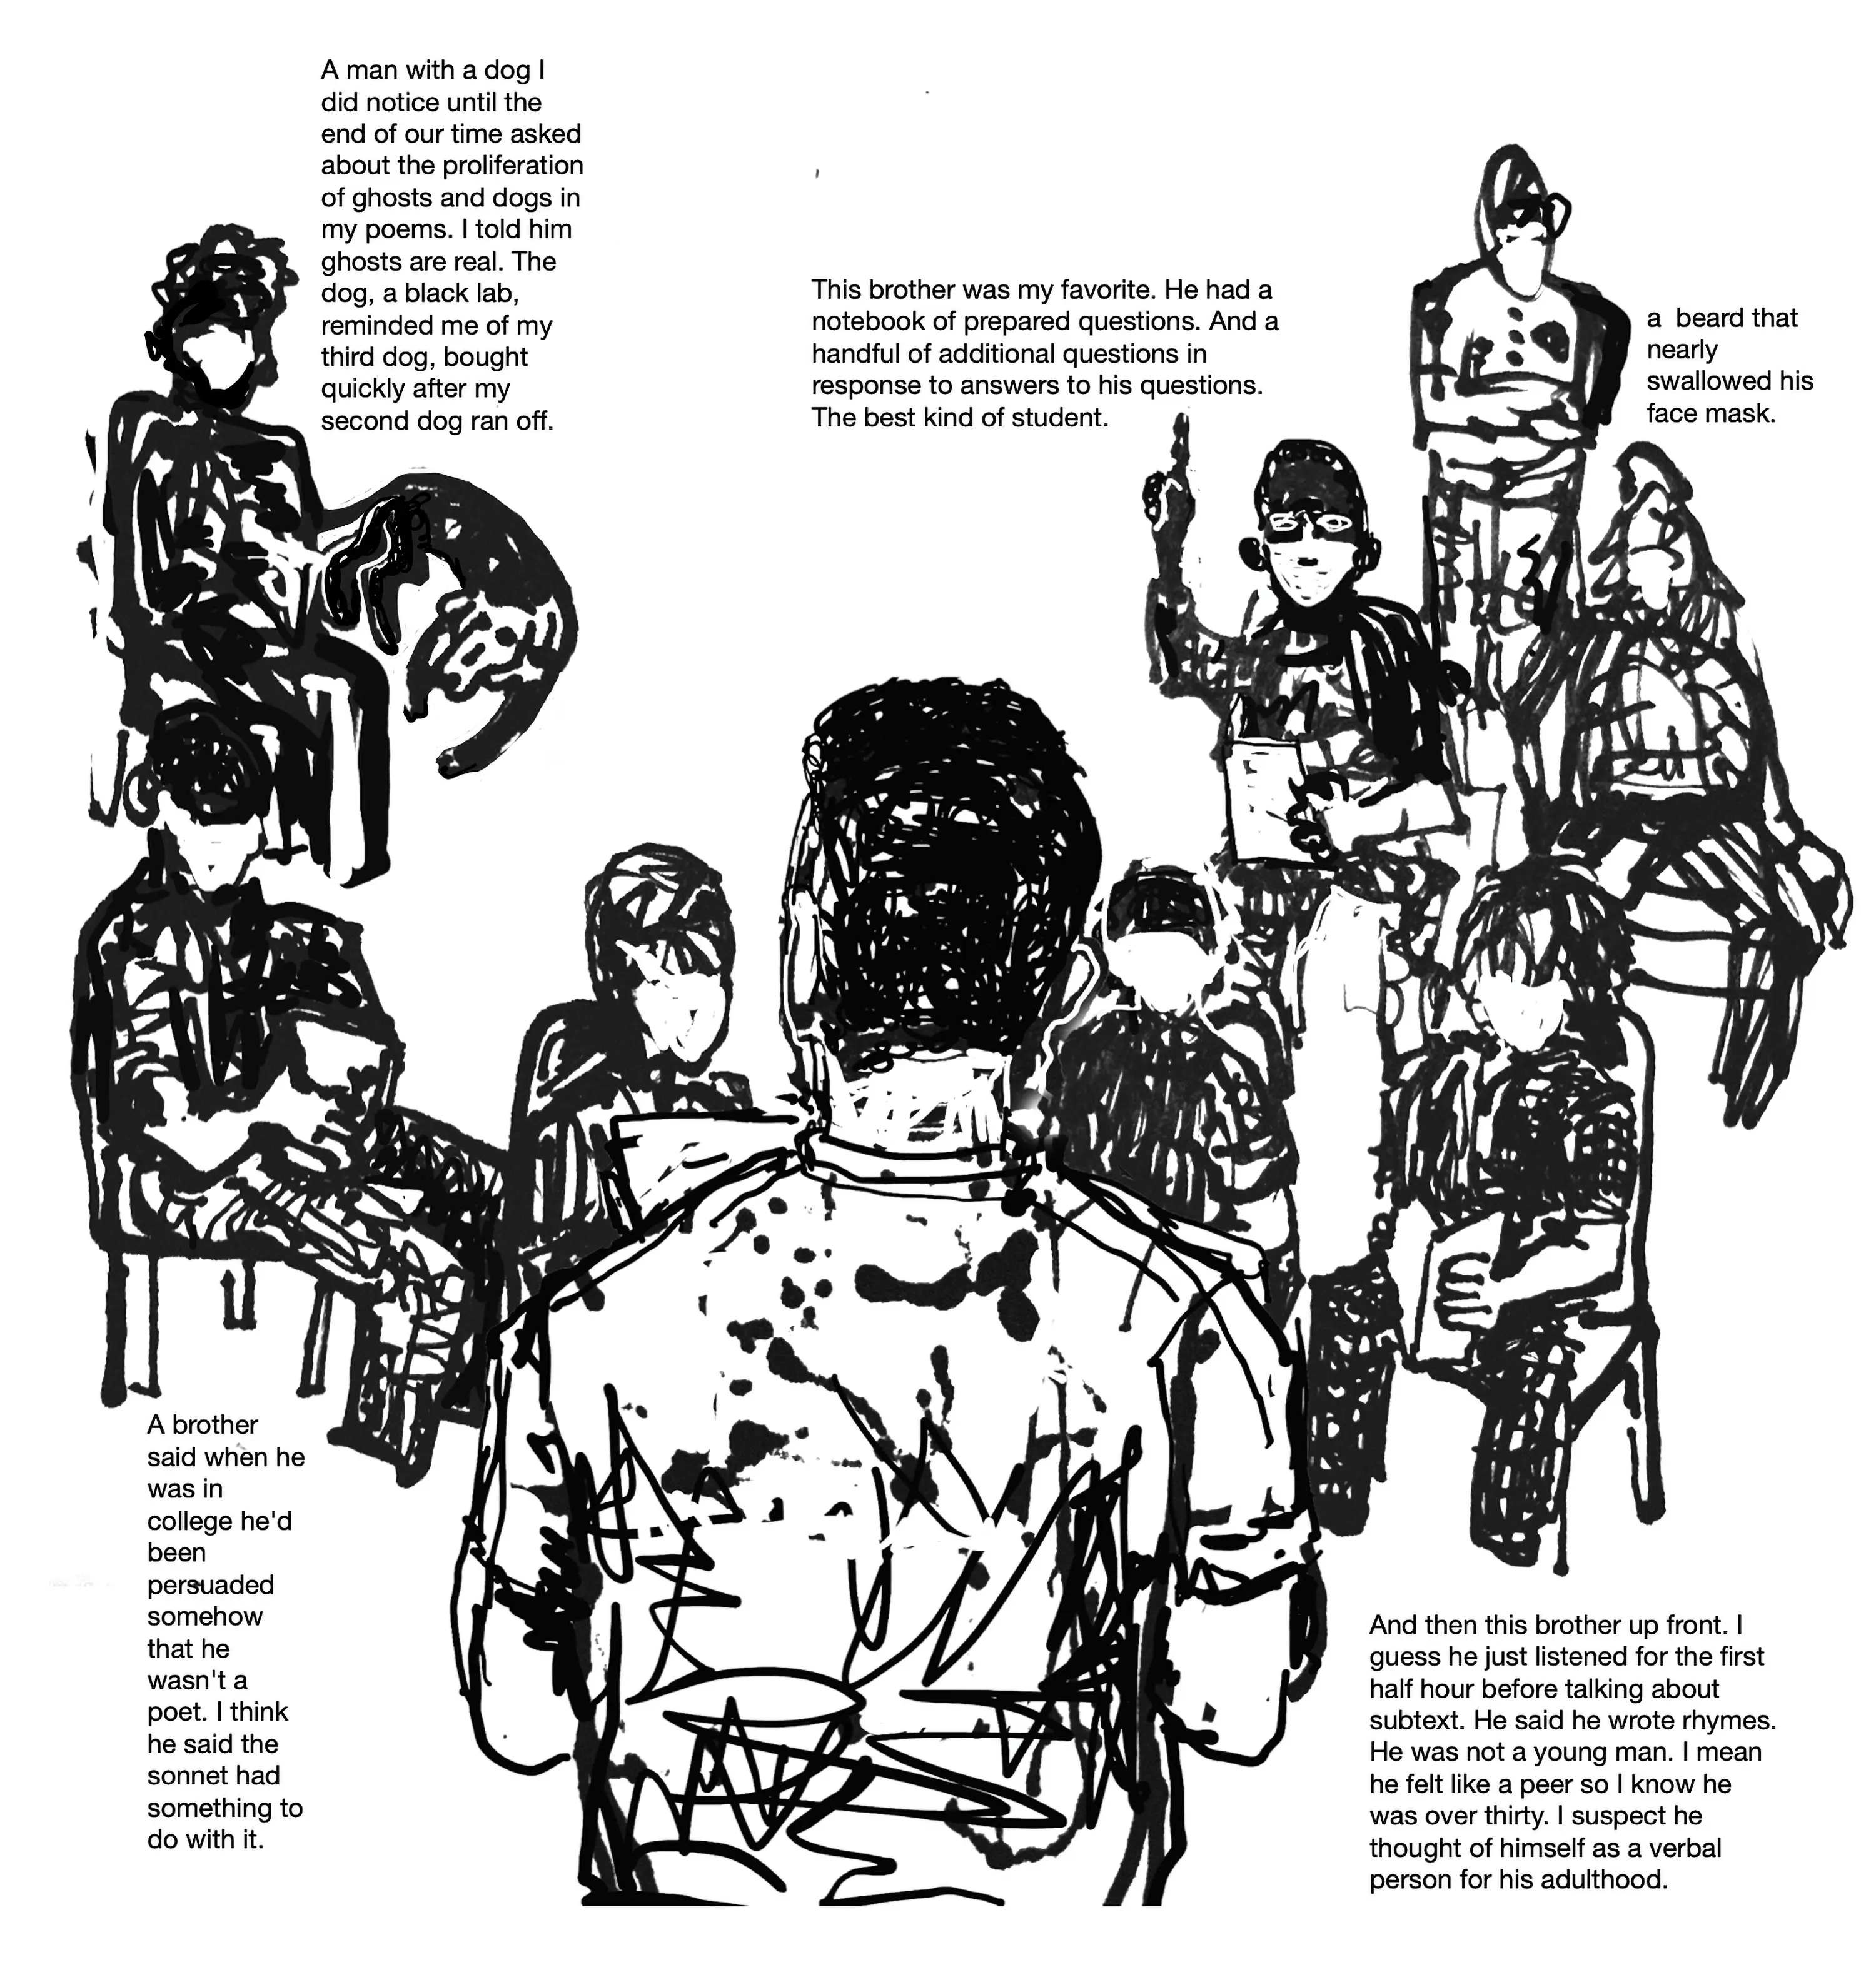 Black and white sketch drawing of the back of a poet reading to an audience at Otisville Correctional Facility with text annotations about the various characters present. Clockwise: 1, A brother said when he was in college he'd been persuaded somehow that he wasn't a poet. I think he said the sonnet had something to do with it. 2, A man with a dog I did notice until the end of our time asked about the proliferation of ghosts and dogs in my poems. I told him ghosts are real. The dog, a black lab, reminded me of my third dog, bought quickly after my second dog ran off. 3, This brother was my favorite. He had a notebook of prepared questions. And a handful of additional questions in response to answers to his questions. The best kind of student. 4, a beard that nearly swallowed his face mask. 5, And then this brother up front. I guess he just listened for the first half hour before talking about subtext. He said he wrote rhymes. He was not a young man. I mean he felt like a peer so l know he was over thirty. I suspect he thought of himself as a verbal person for his adulthood.